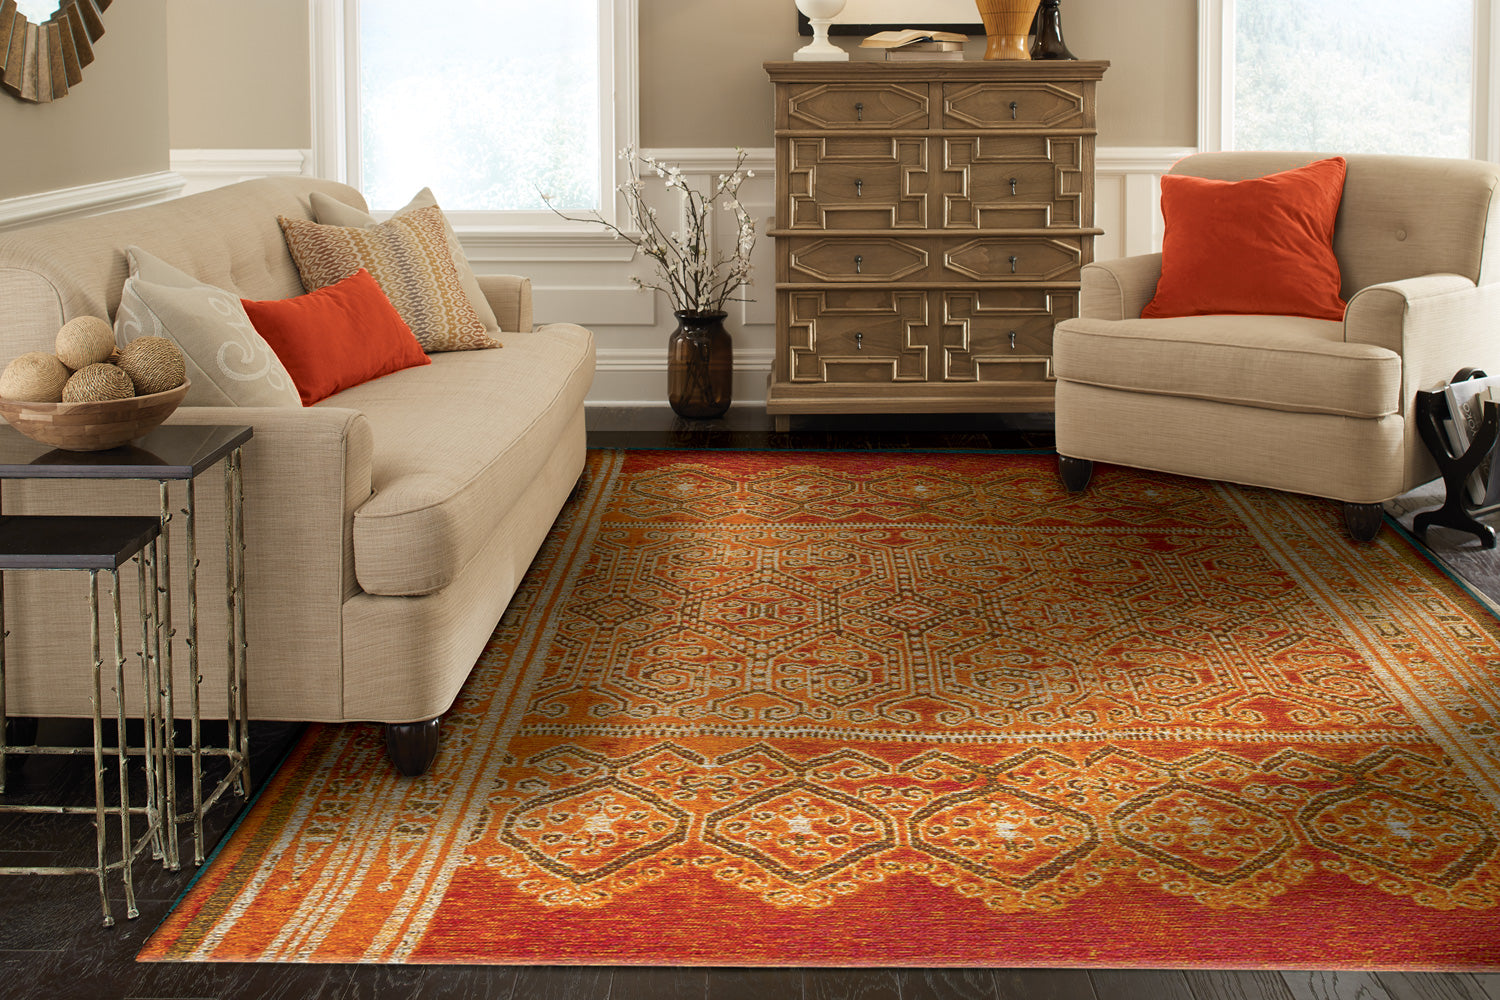 8 Simple Rules to Find The Perfect Colored Rug